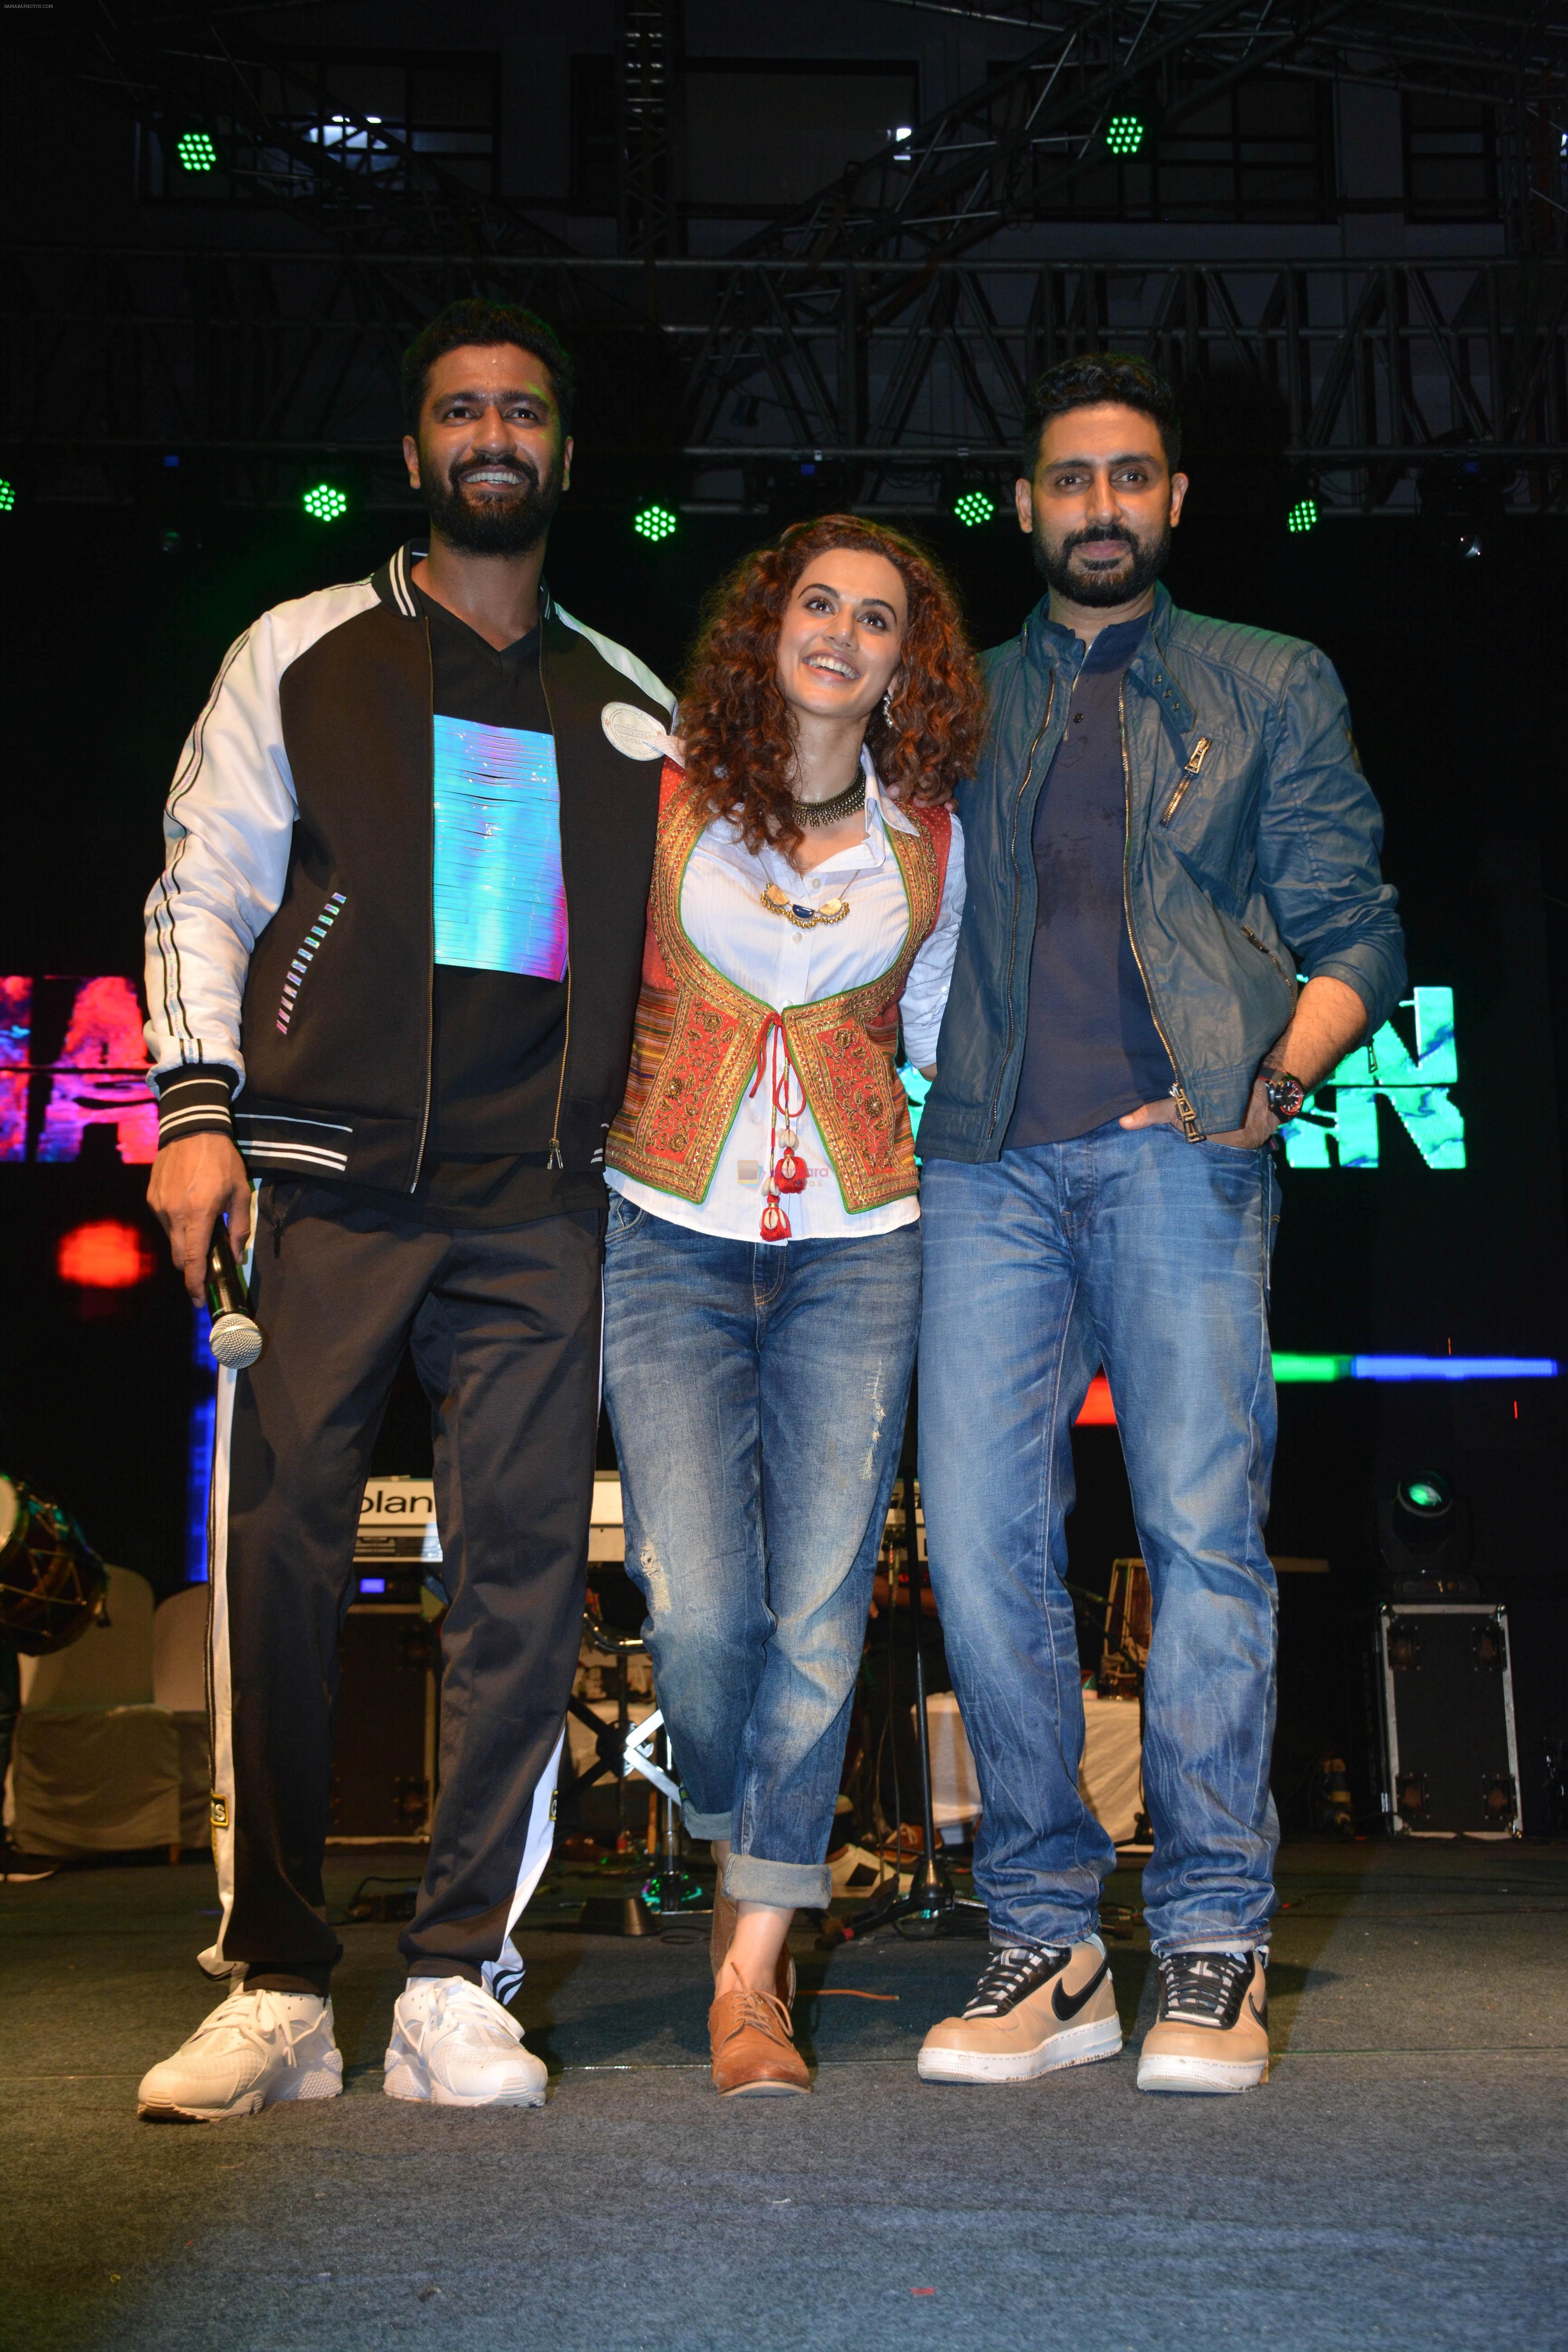 Vicky Kaushal, Taapsee Pannu, Abhishek Bachchan at Manmarziyaan Music Concert in NM College In Juhu on 19th Aug 2018